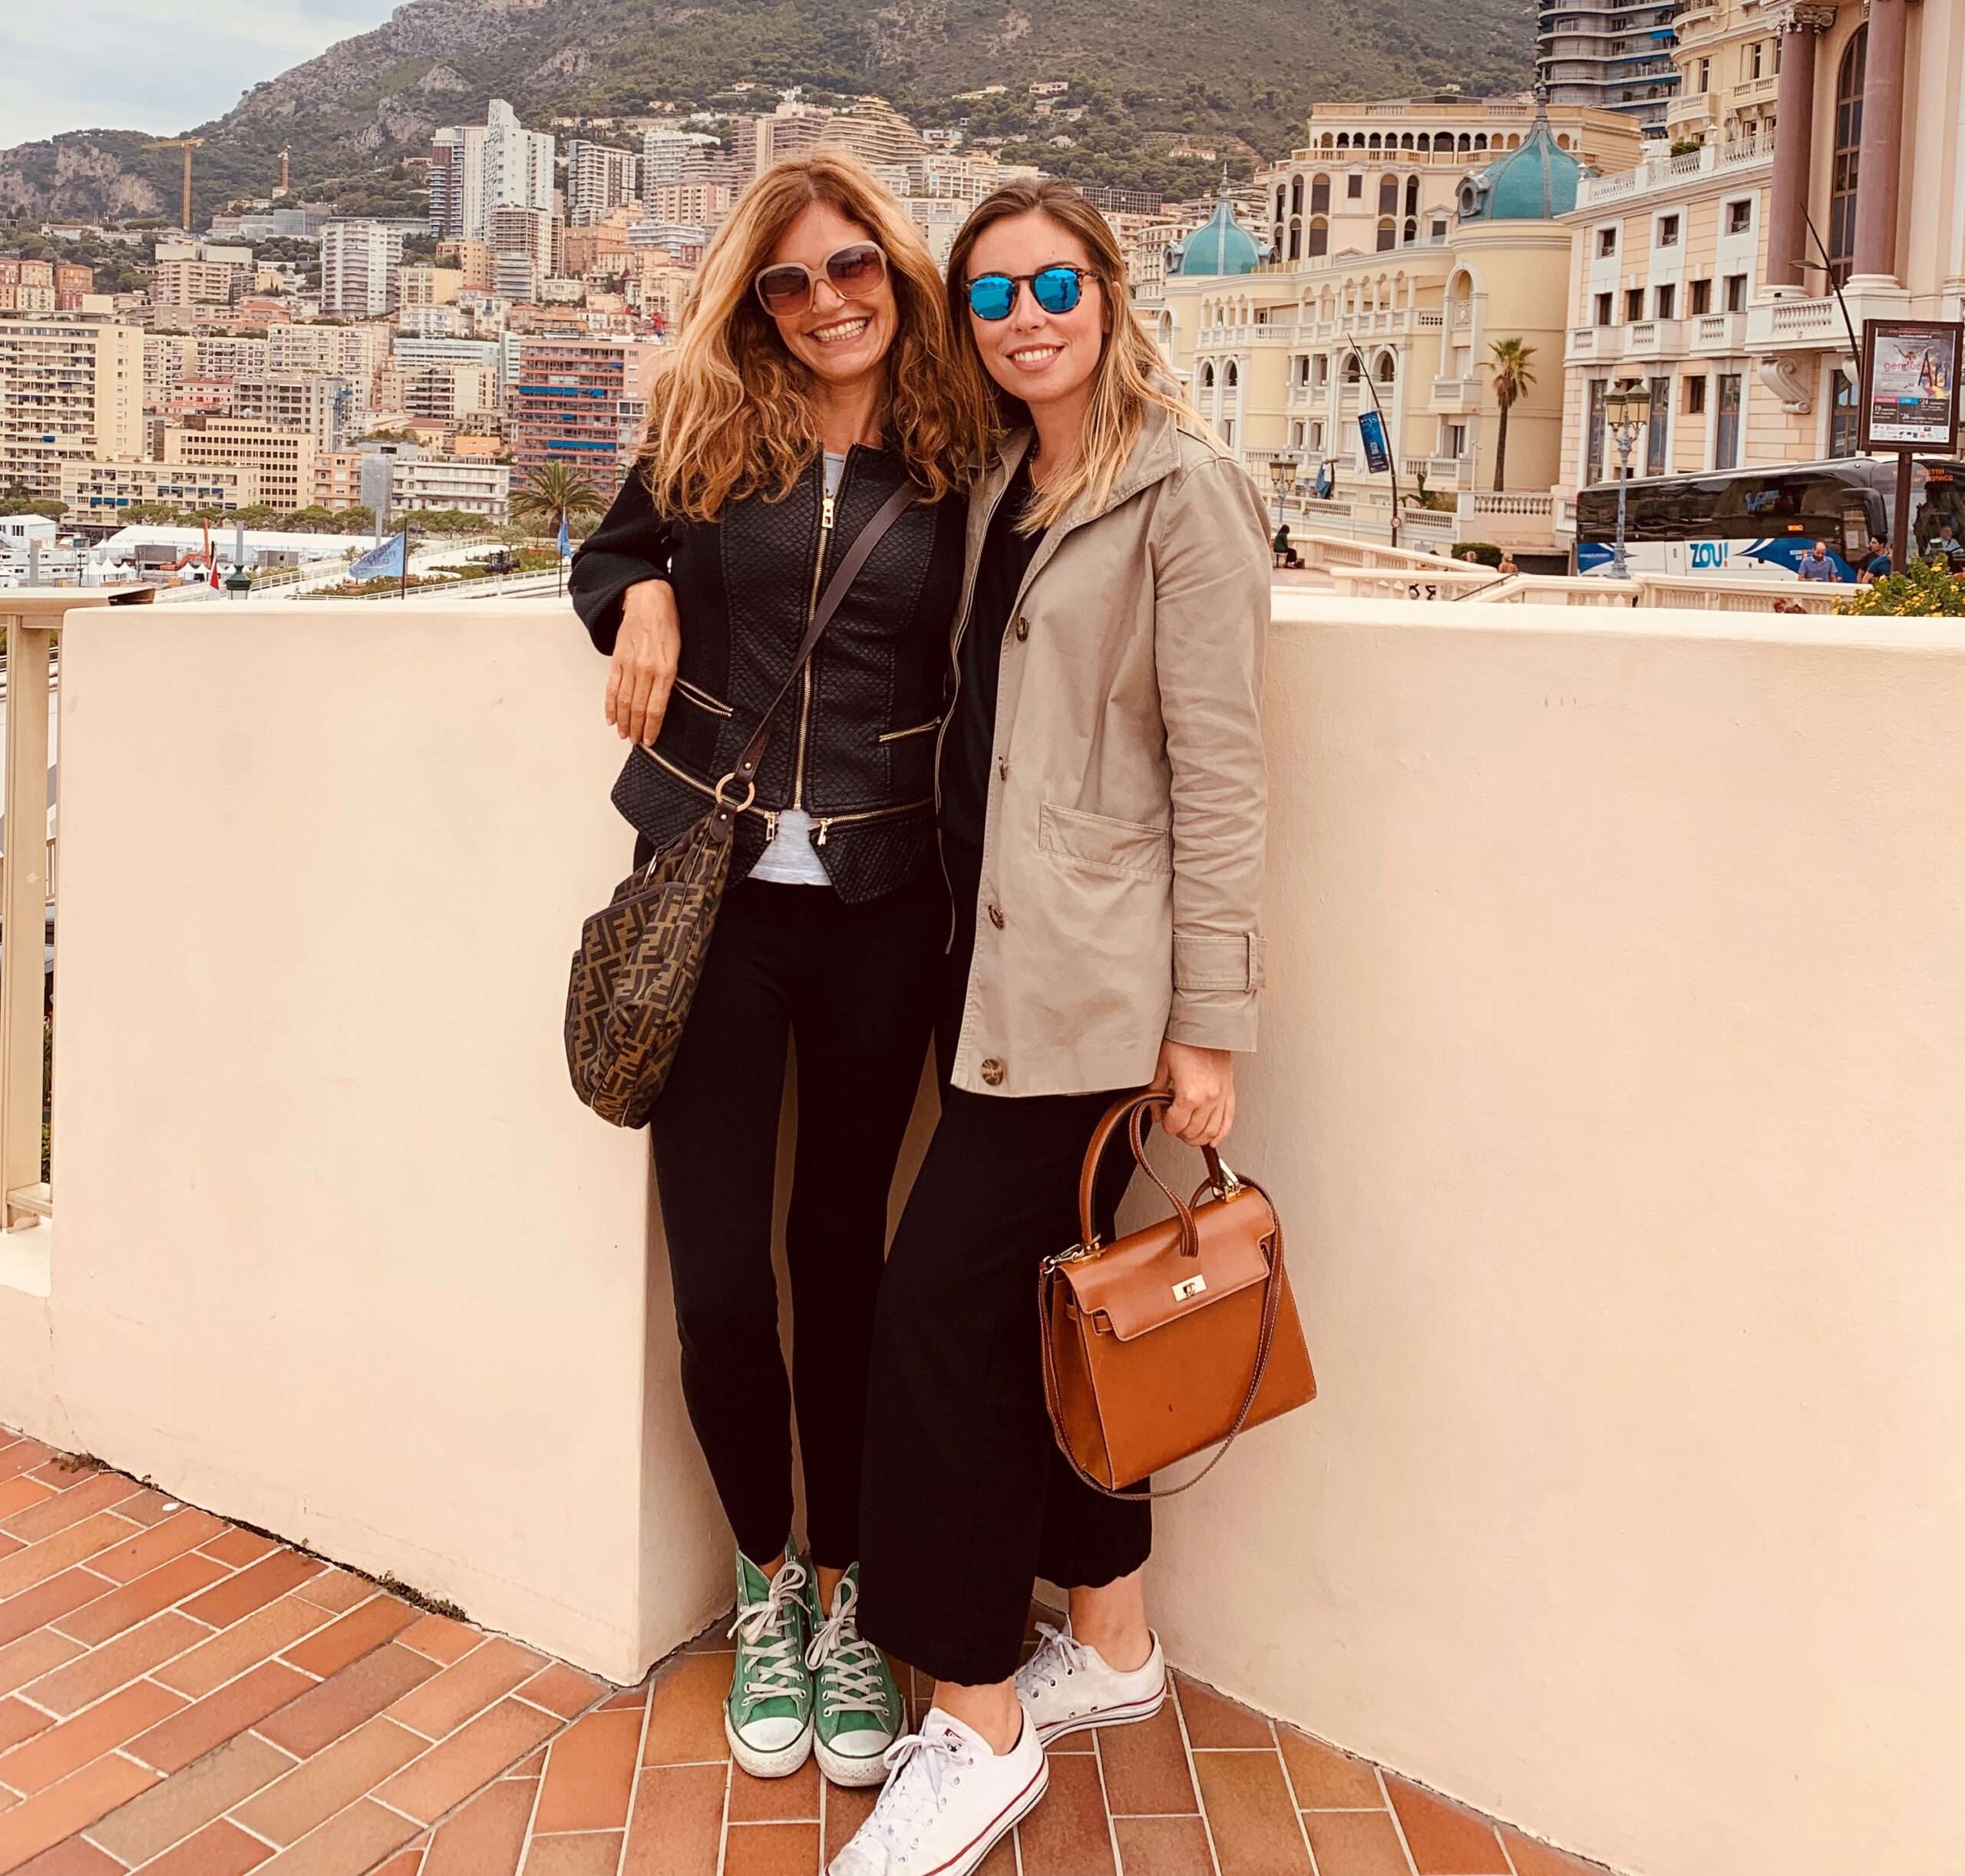 Alice and Arianna are the founders of Florence Fashion Tour